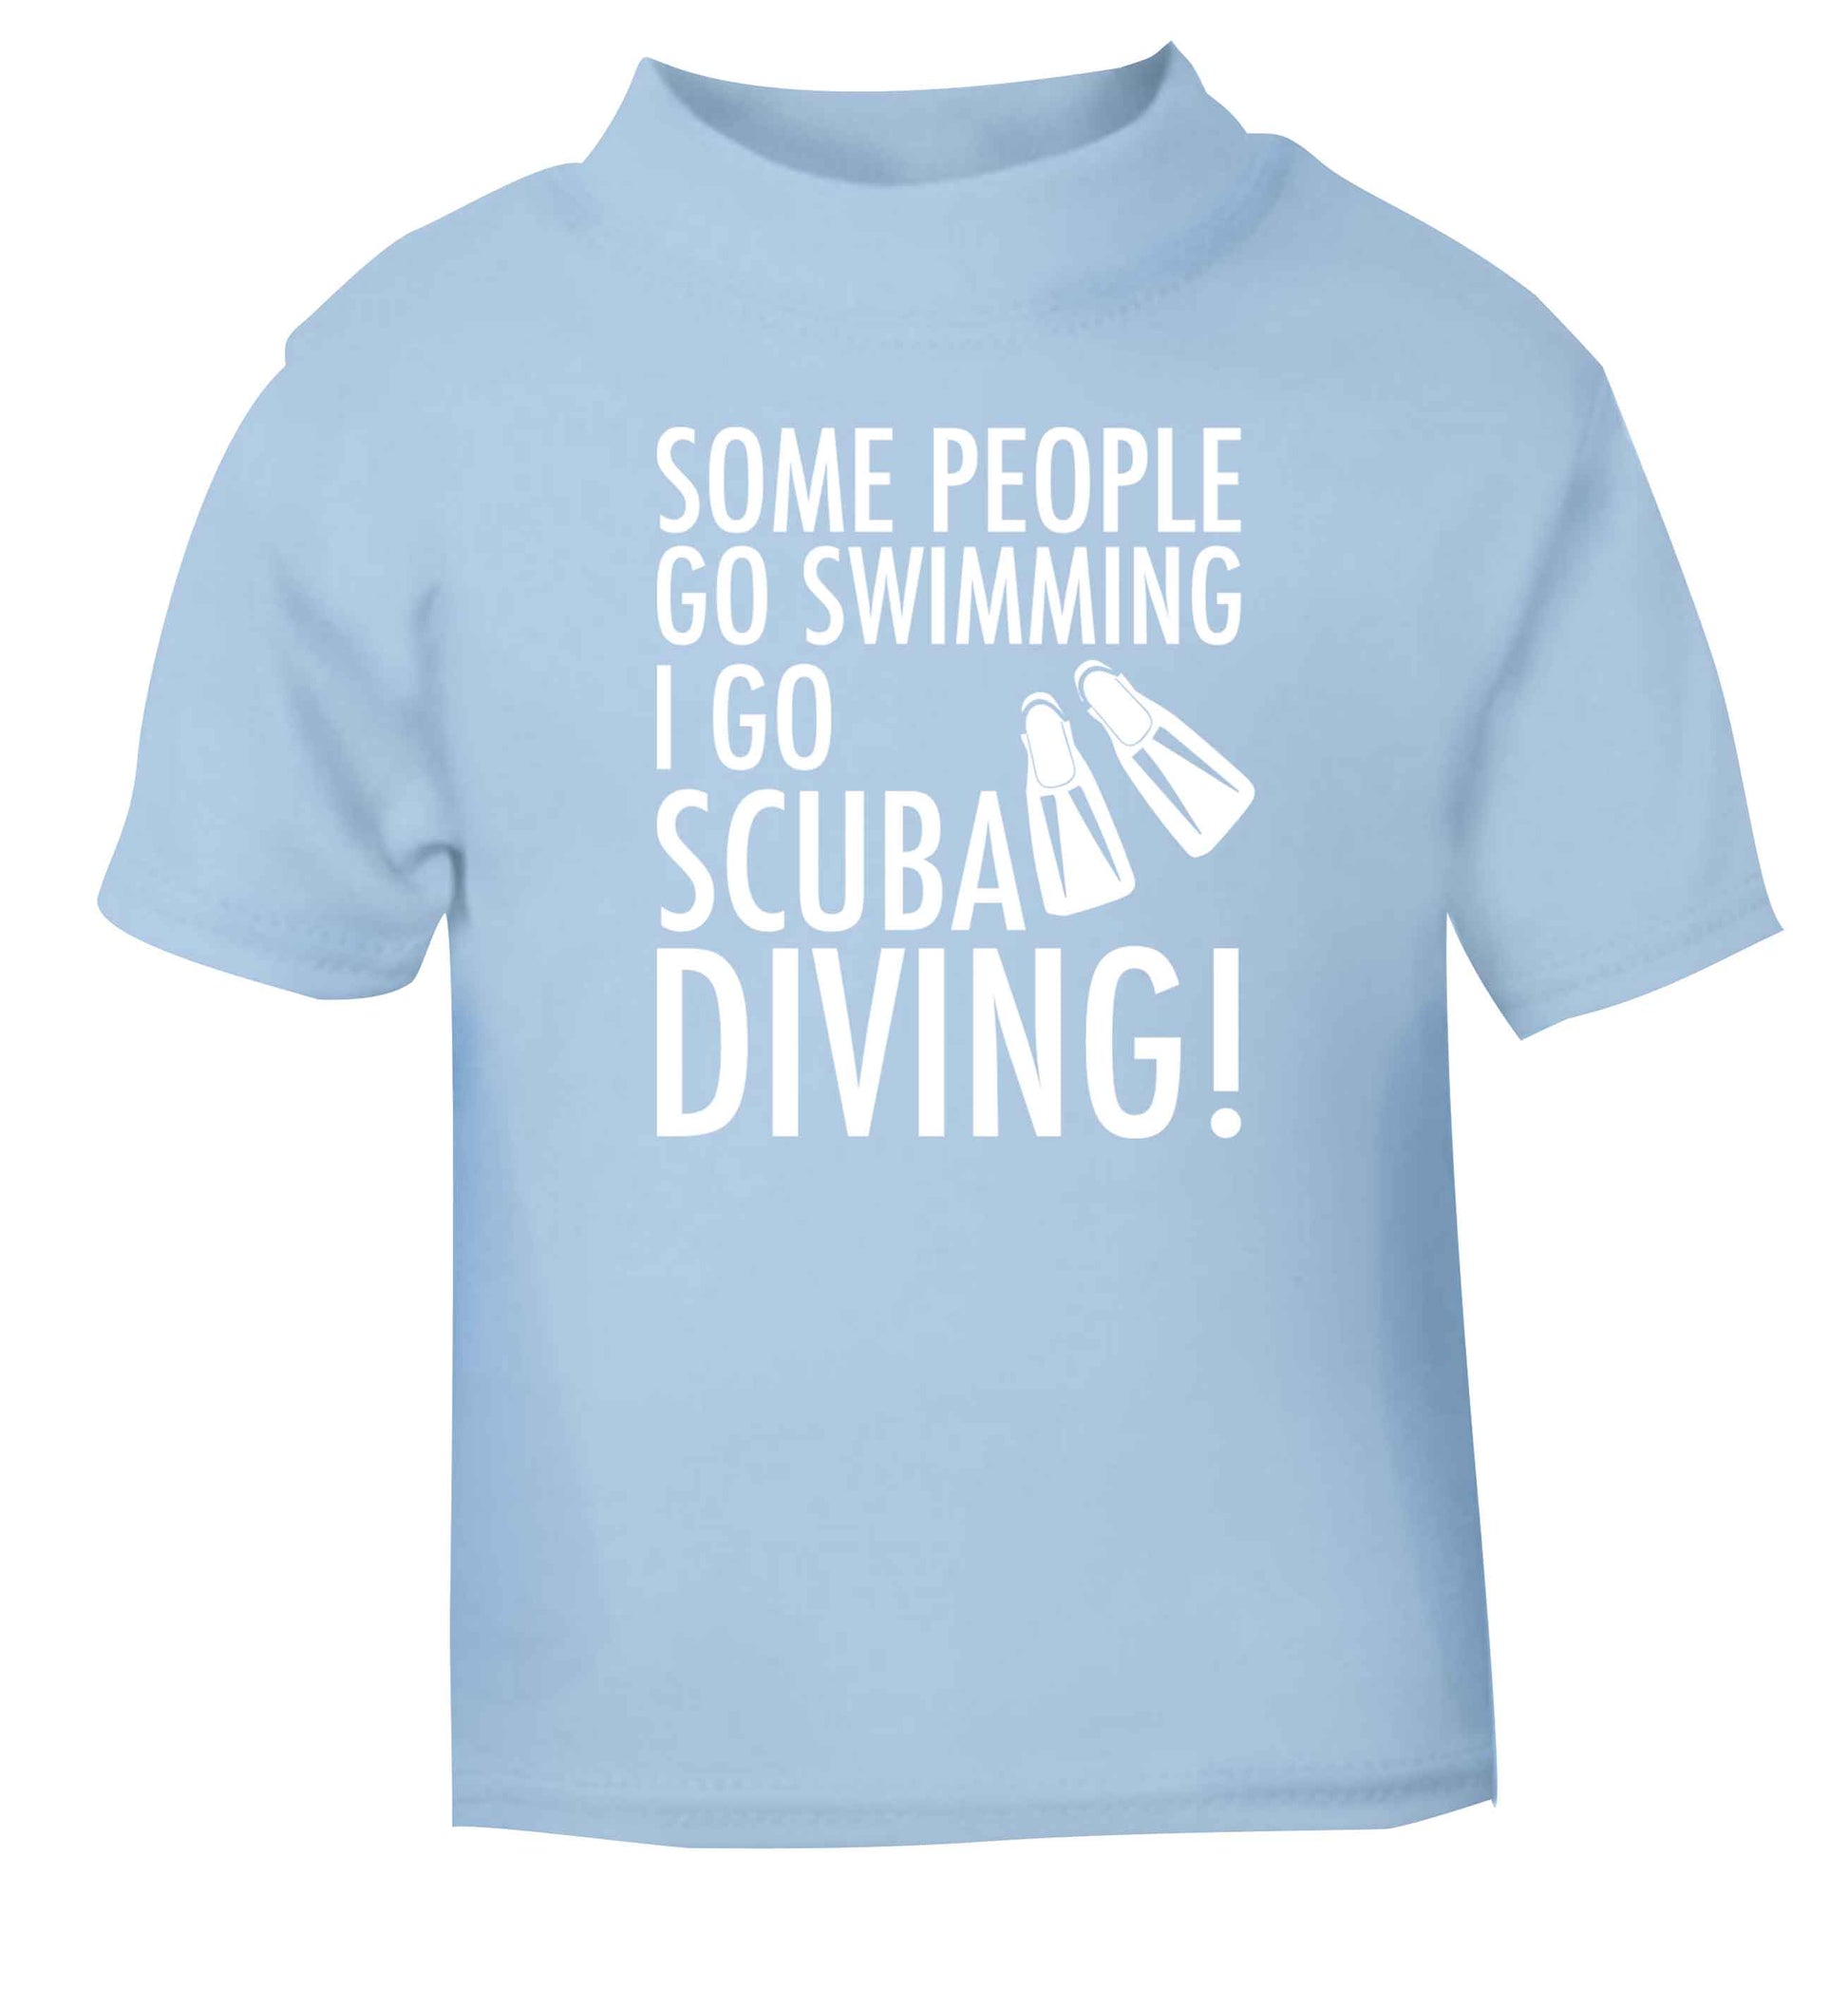 Some people go swimming I go scuba diving! light blue Baby Toddler Tshirt 2 Years